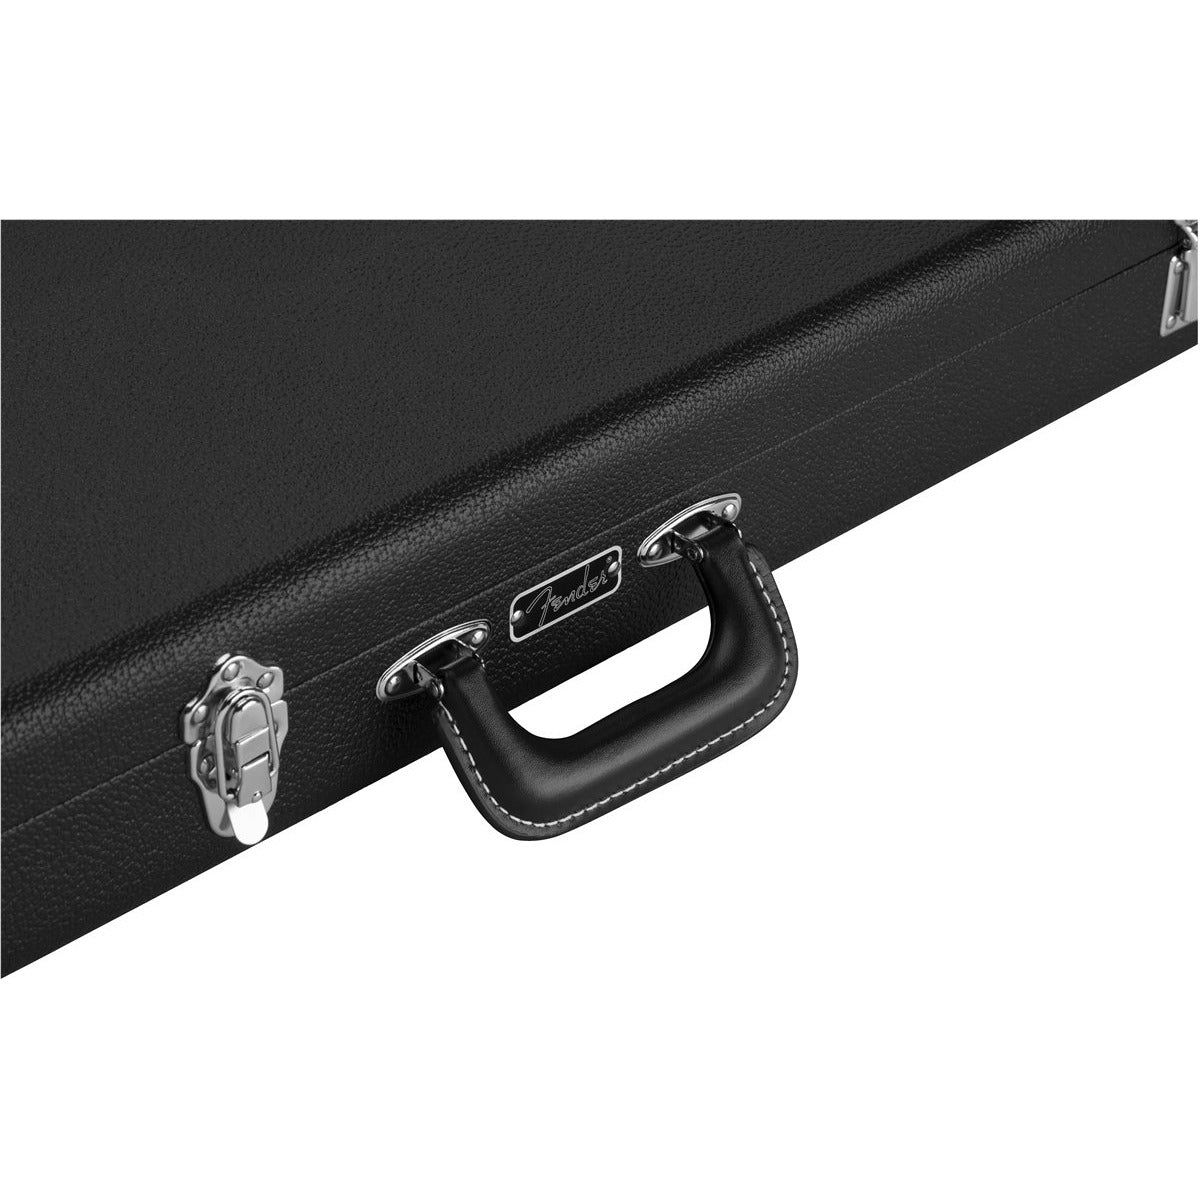 Handle and Clasp of Fender Classic Series Wood Case